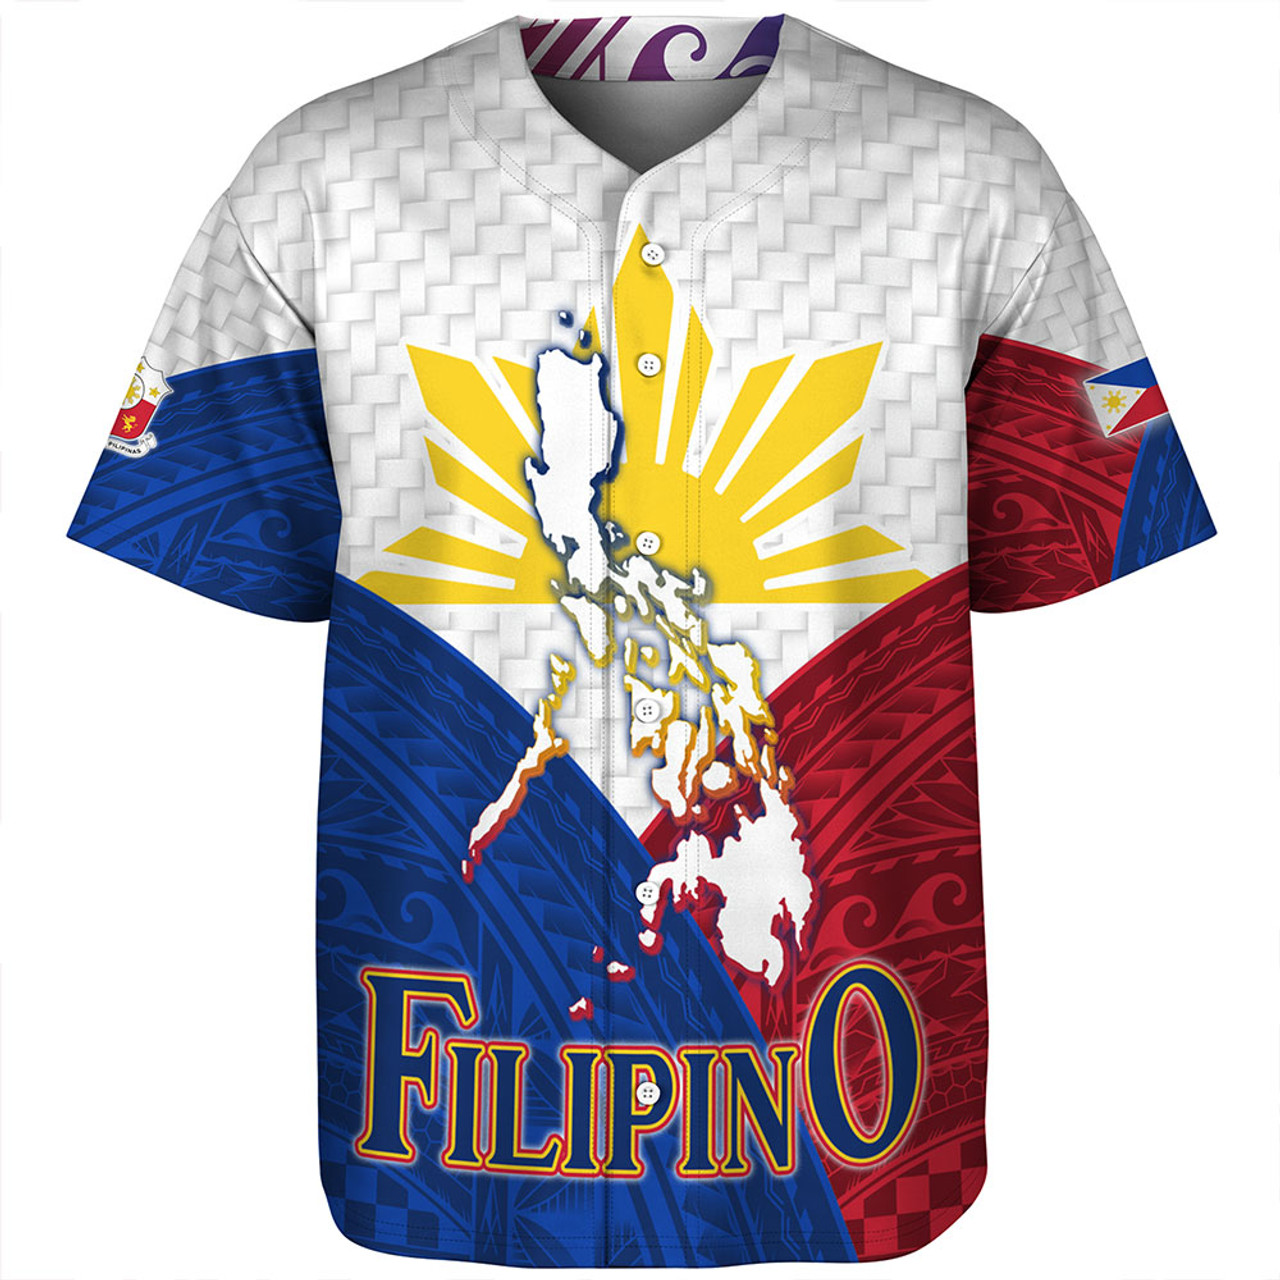 Philippines Baseball Shirt - Philippines National Bird With Sun And Stars Style